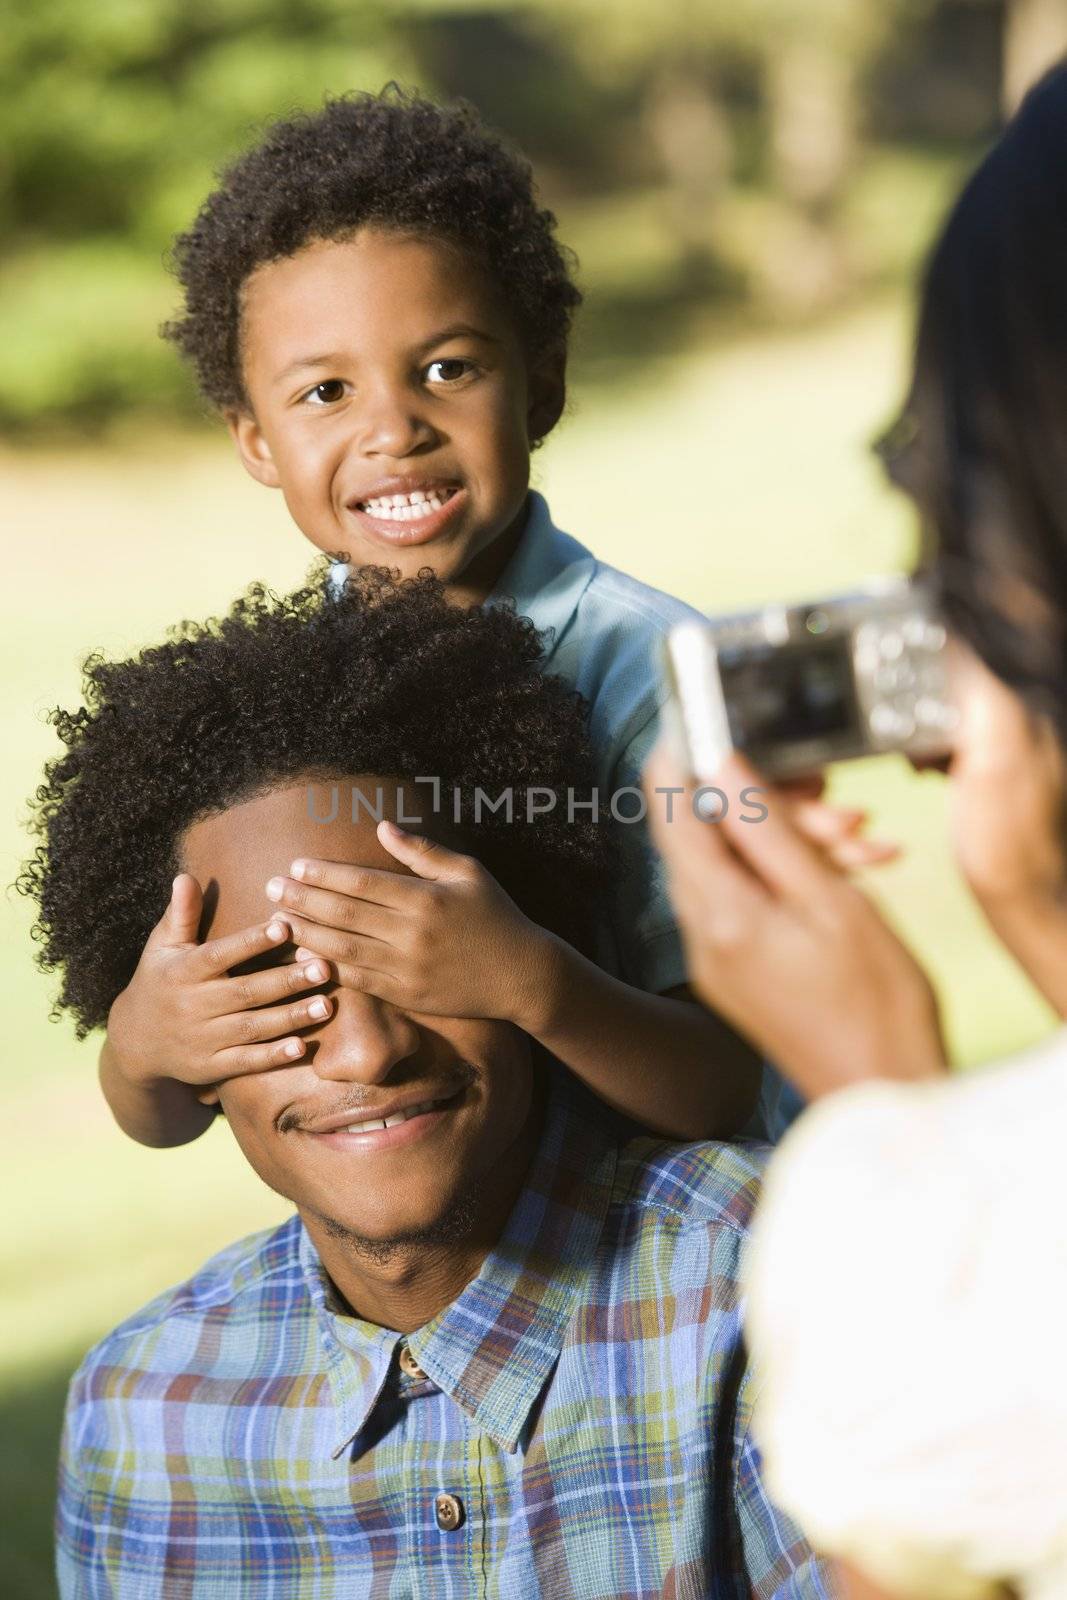 Woman taking digital photo of husband and son in park.